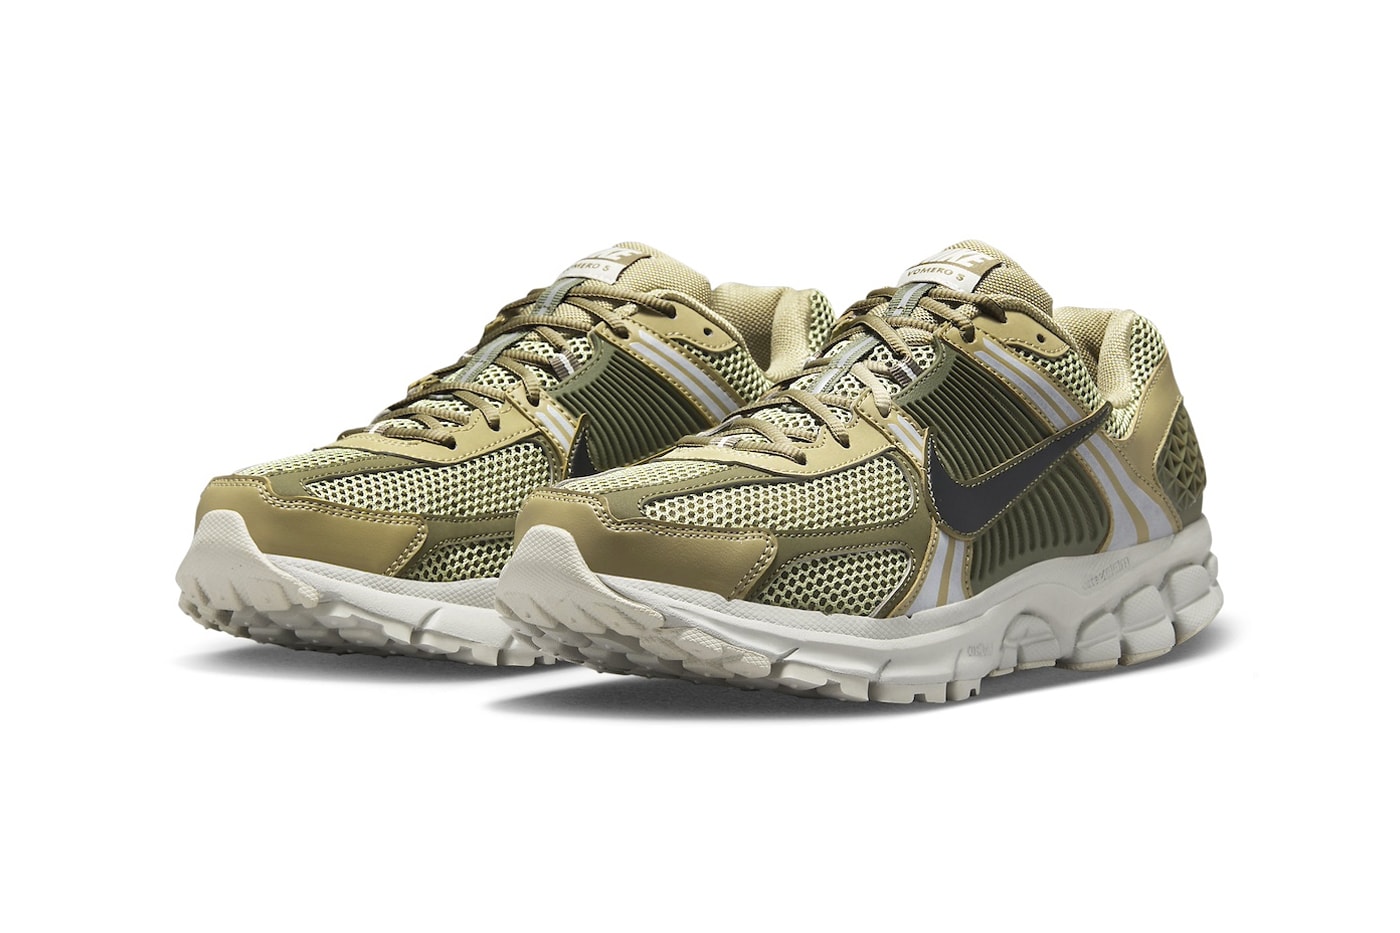 Nike Zoom Vomero 5 Resurfaces in "Neutral Olive" FJ1915-200 comfortable dad sneakers swoosh everyday shoes green 